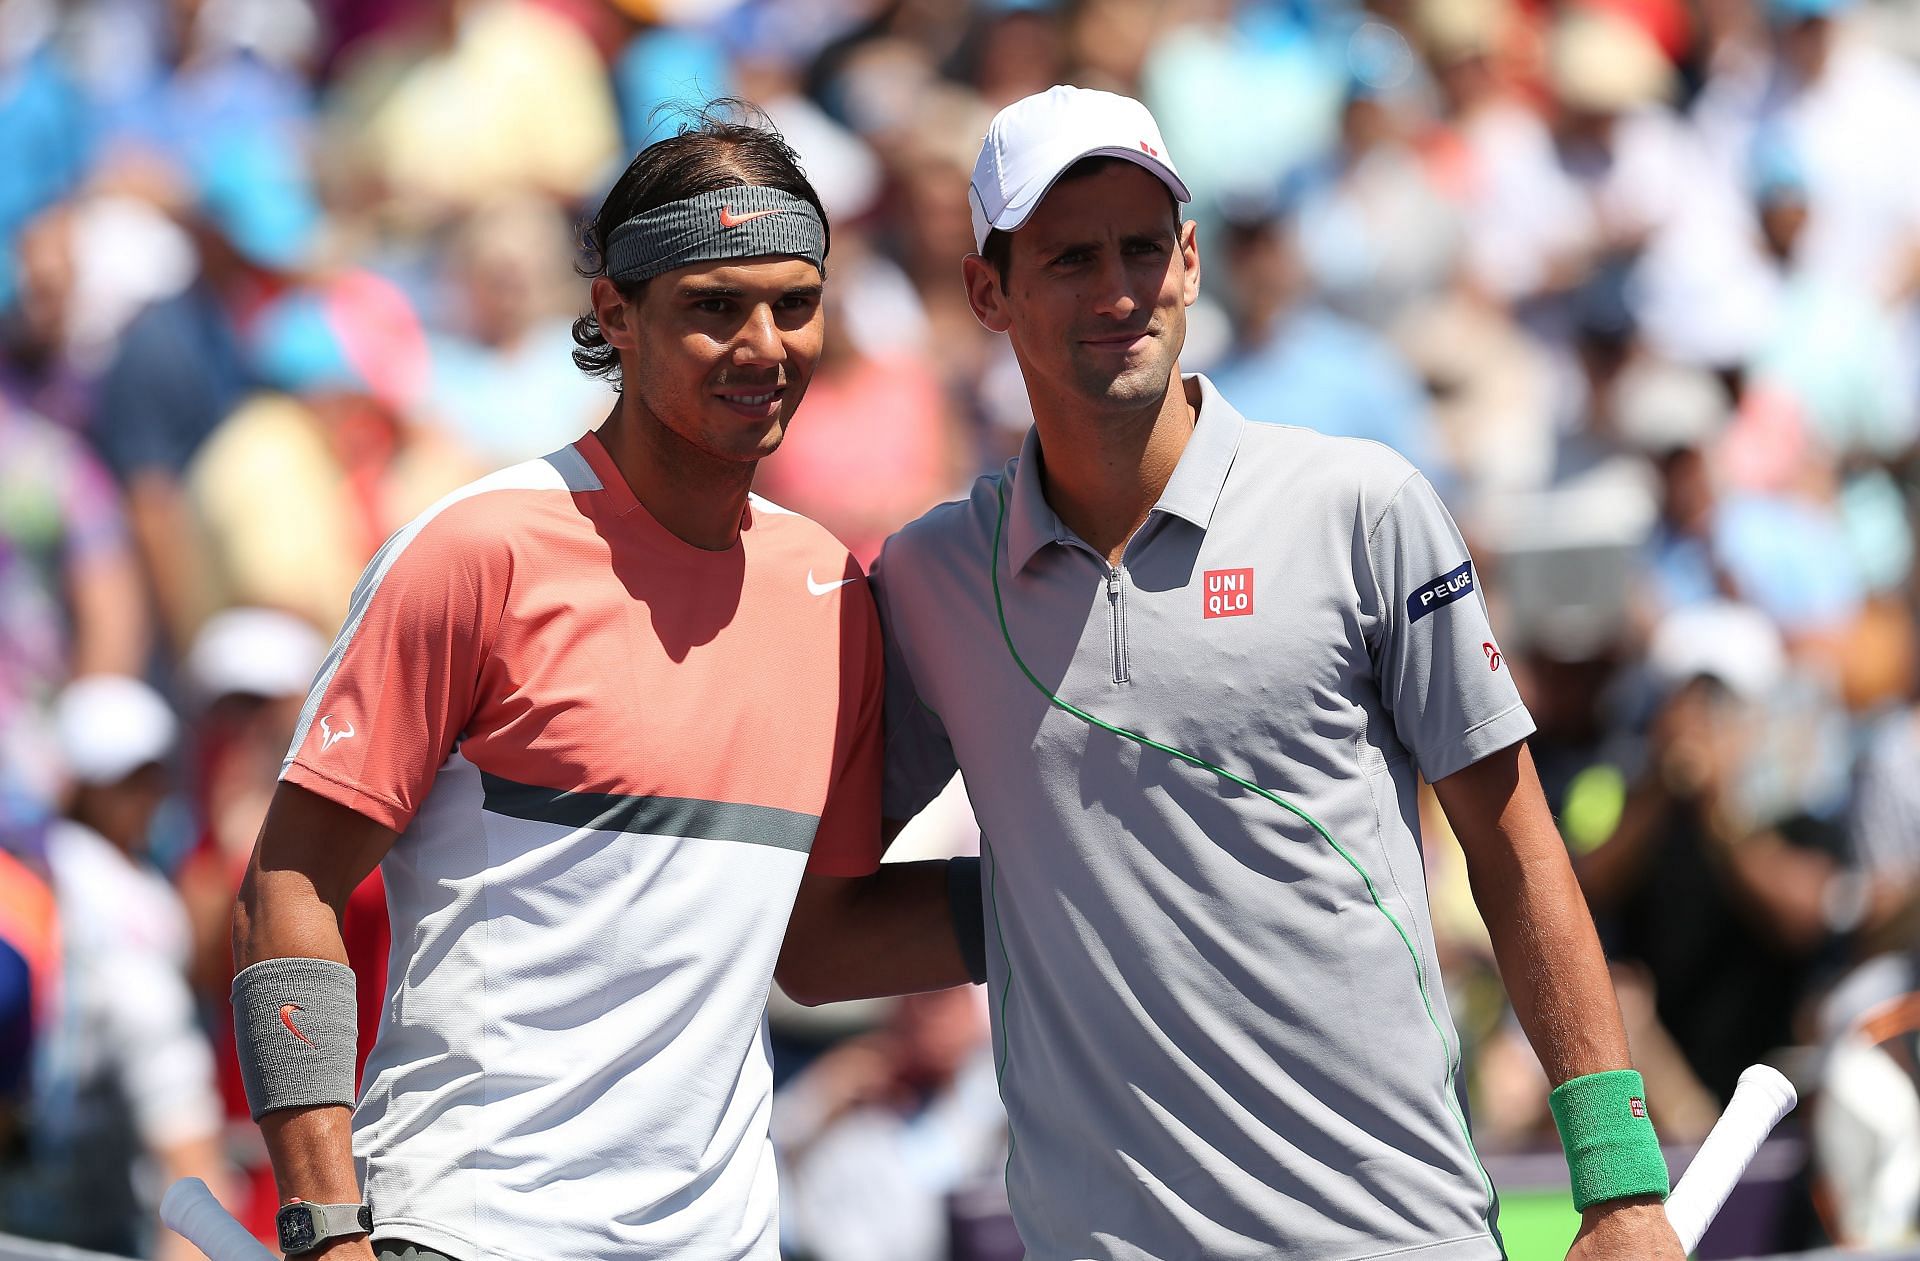 Novak Djokovic and Rafael Nadal could meet in the semifinals of the 2022 Italian Open